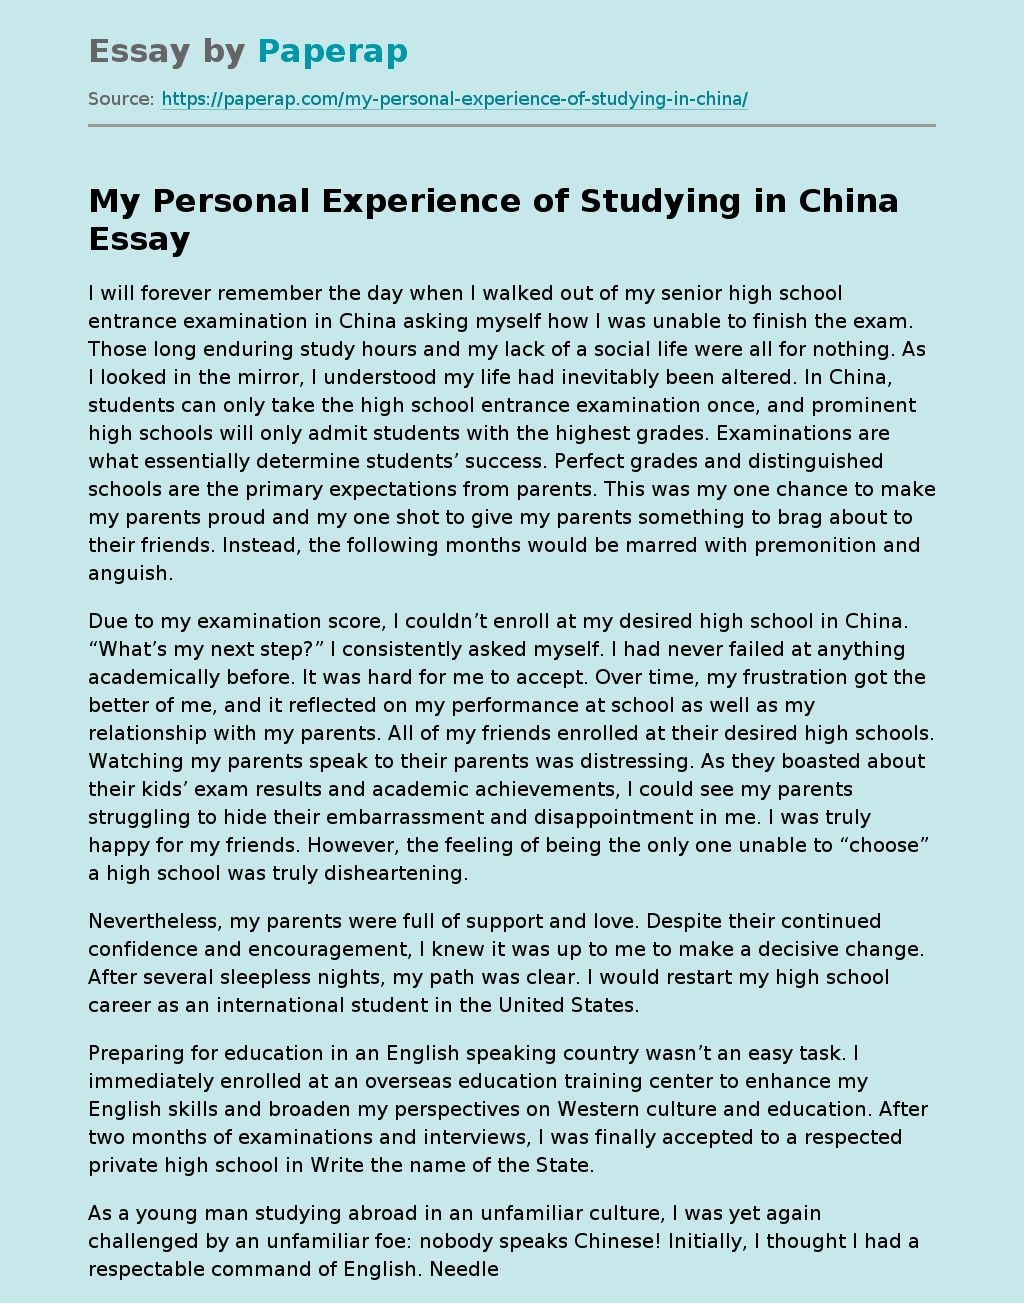 My Personal Experience of Studying in China